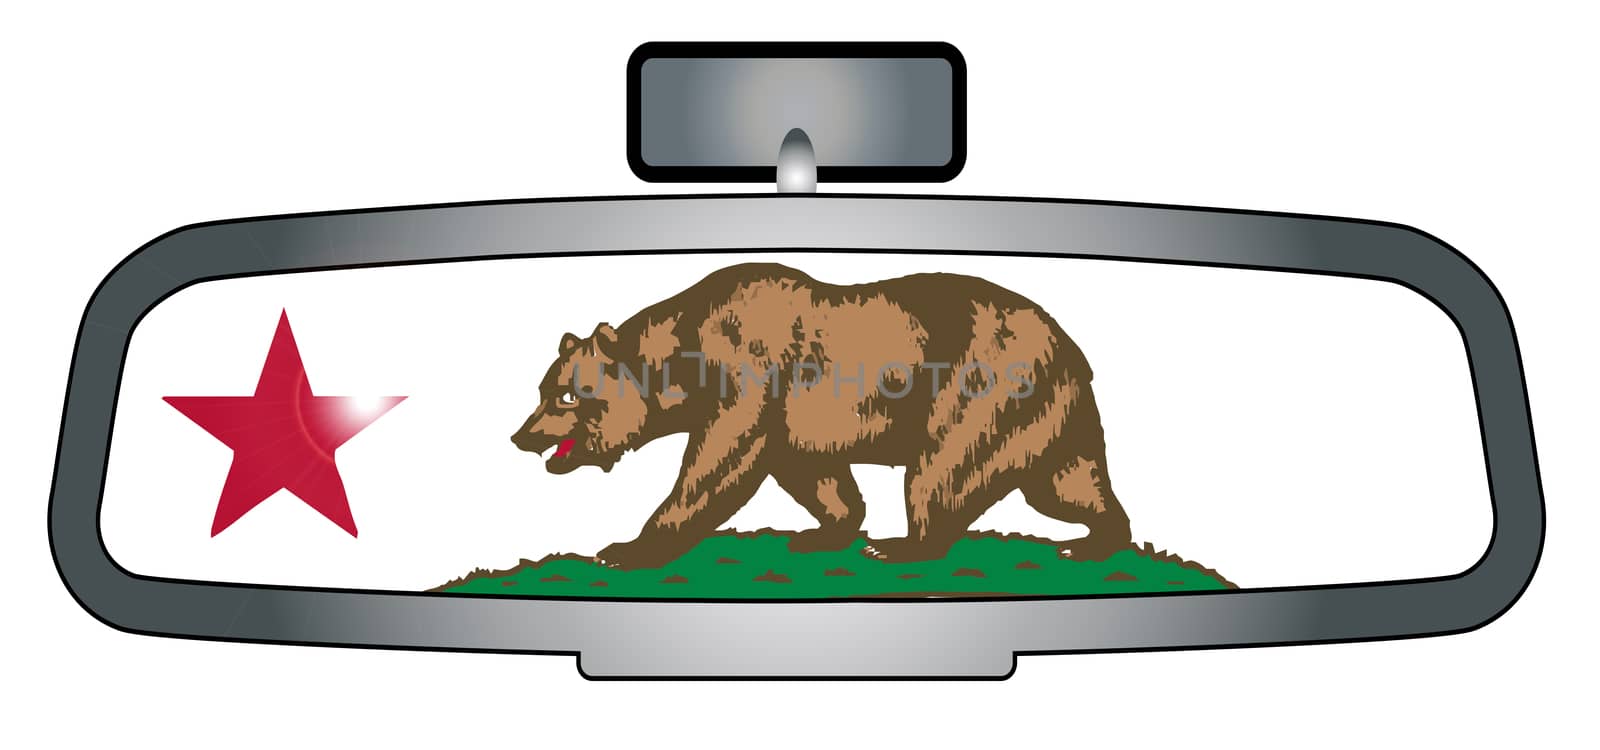 A vehicle rear view mirror with the flag of the state of California